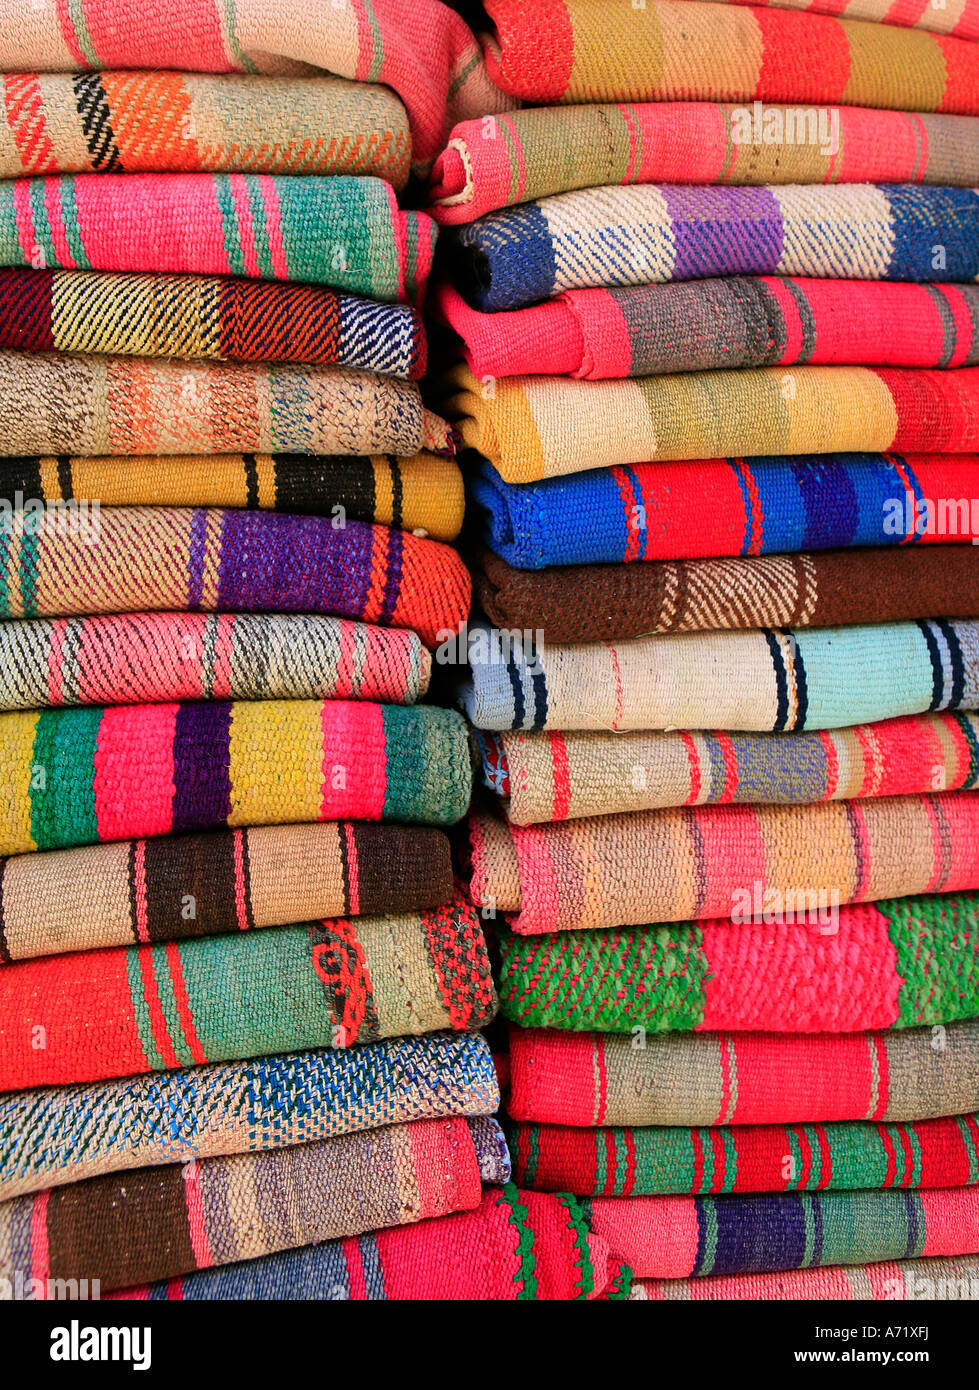 Blankets for Sale Witches Market La Paz Bolivia Stock Photo